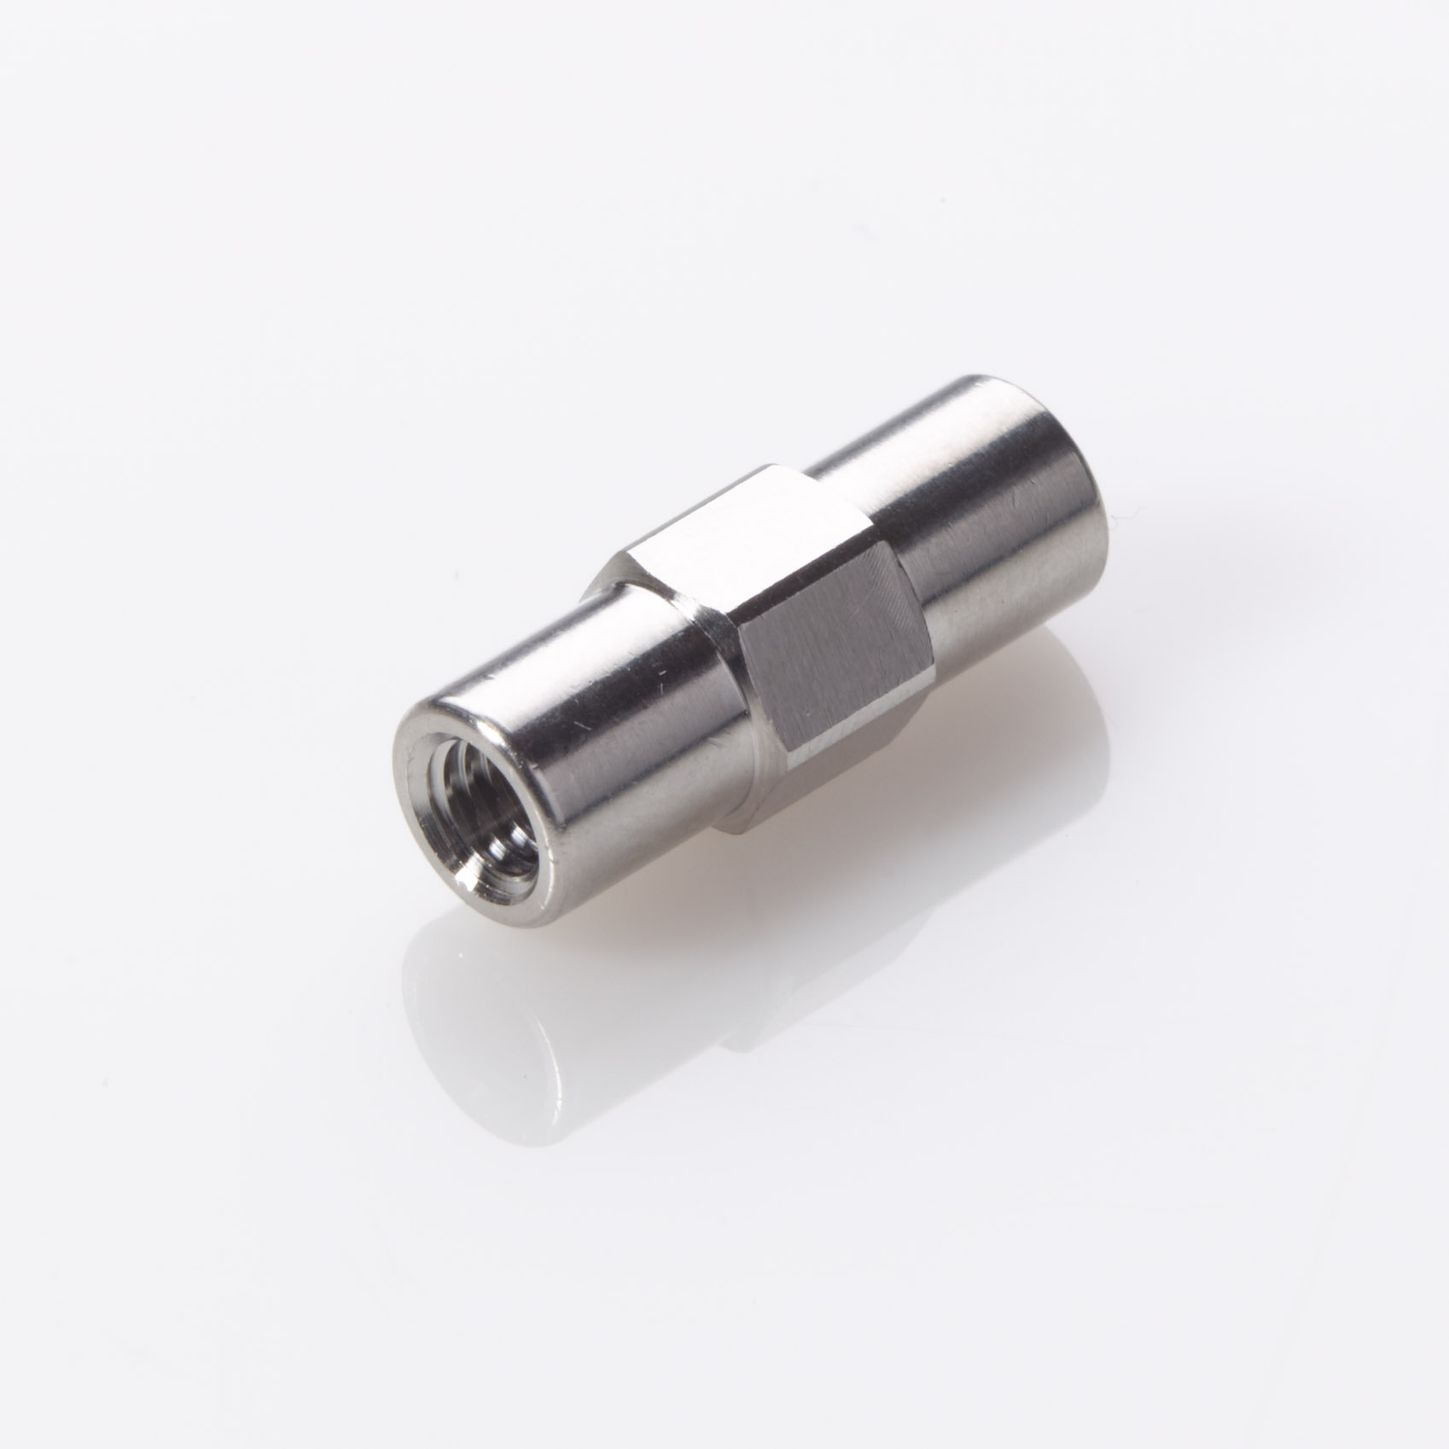 Connector Union ZDV Stainless Steel 0.007 (0.18mm) Thru-Hole for 1/16" OD Tubing (Union Body Only)